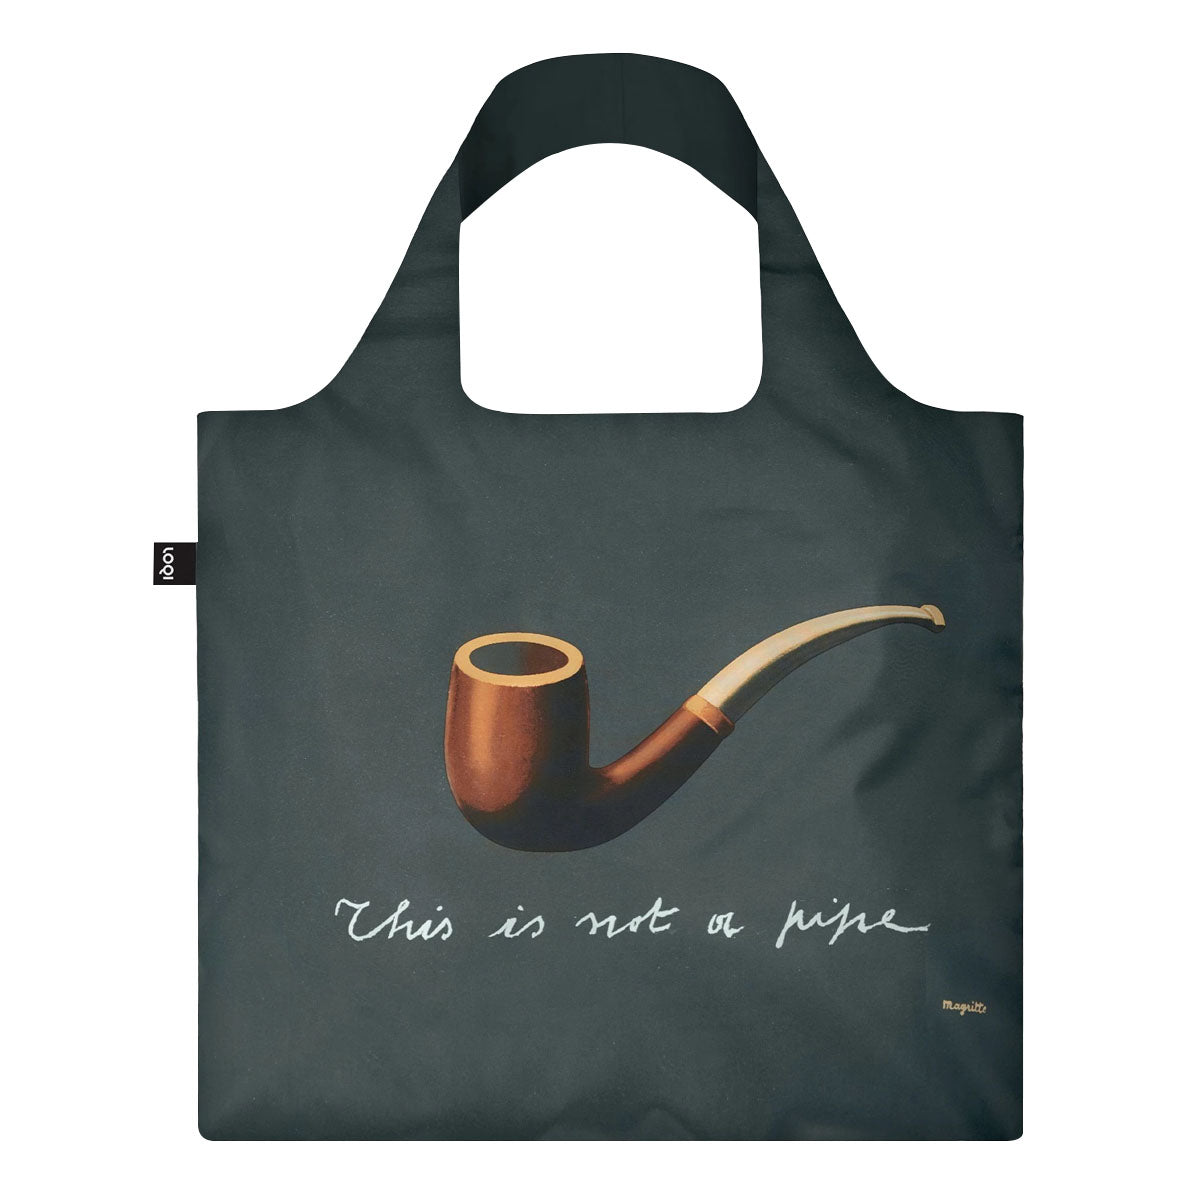 LOQI Museum Rene Magritte's The Treachery of Images Reusable Shopping Bag